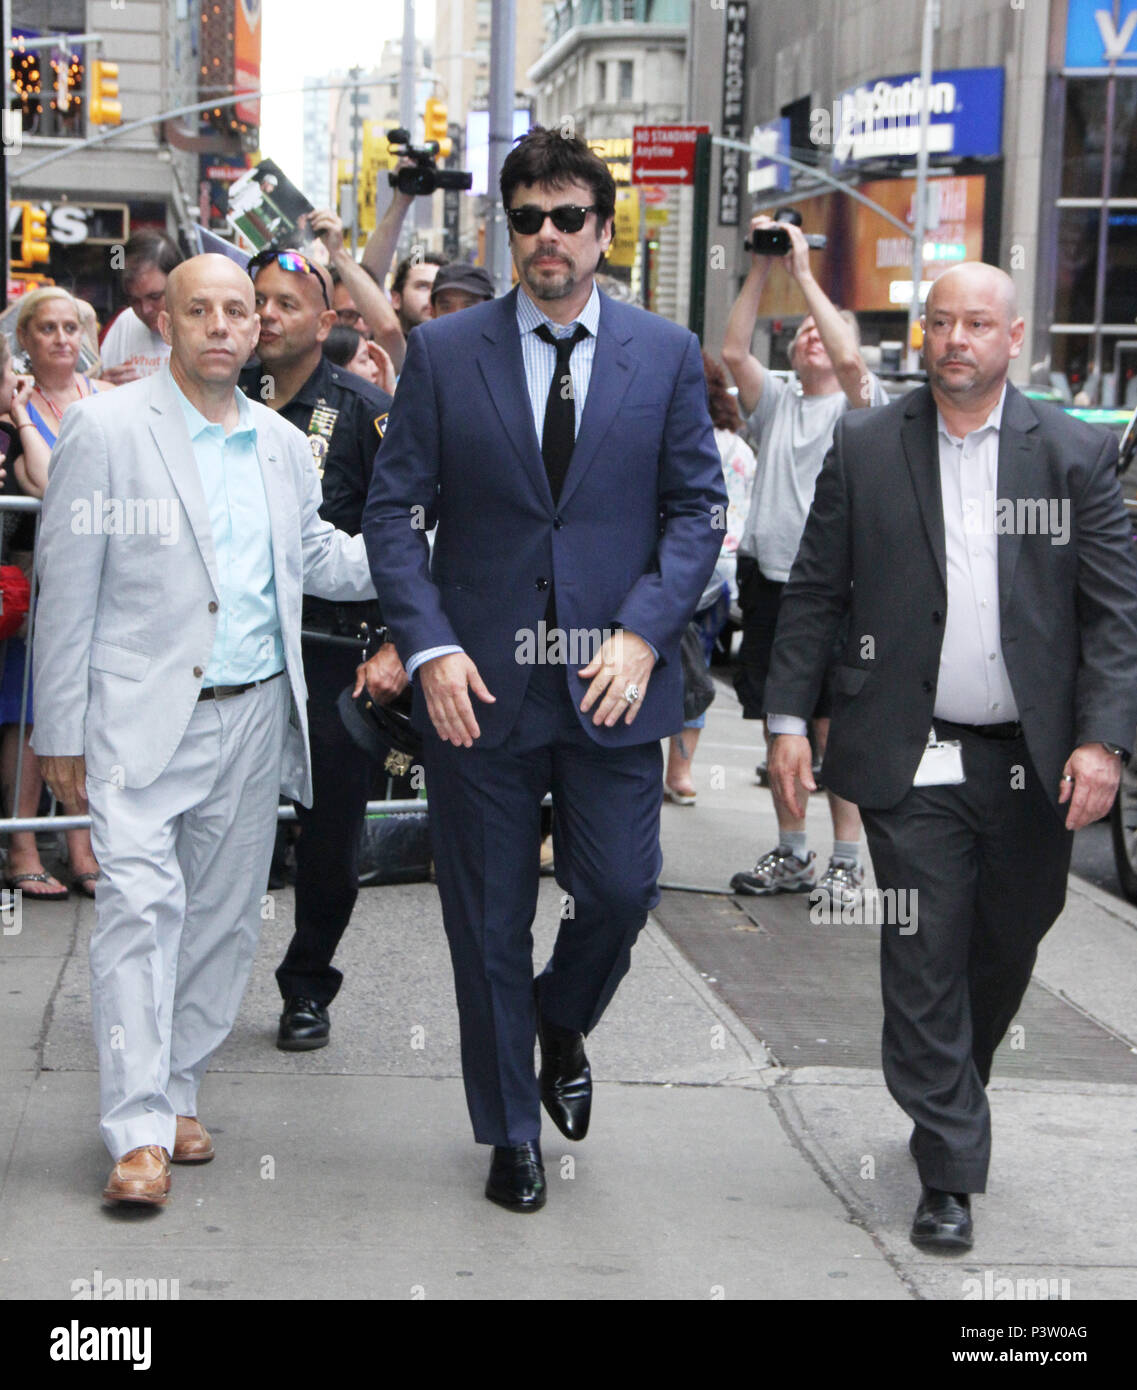 NEW YORK, NY June 19, 2018:Benicio Del Toro at Good Morning America to talk about about new movie Sicario: Day of the Soldado in New York. June 19, 2018 Credit:RW/MediaPunch Stock Photo